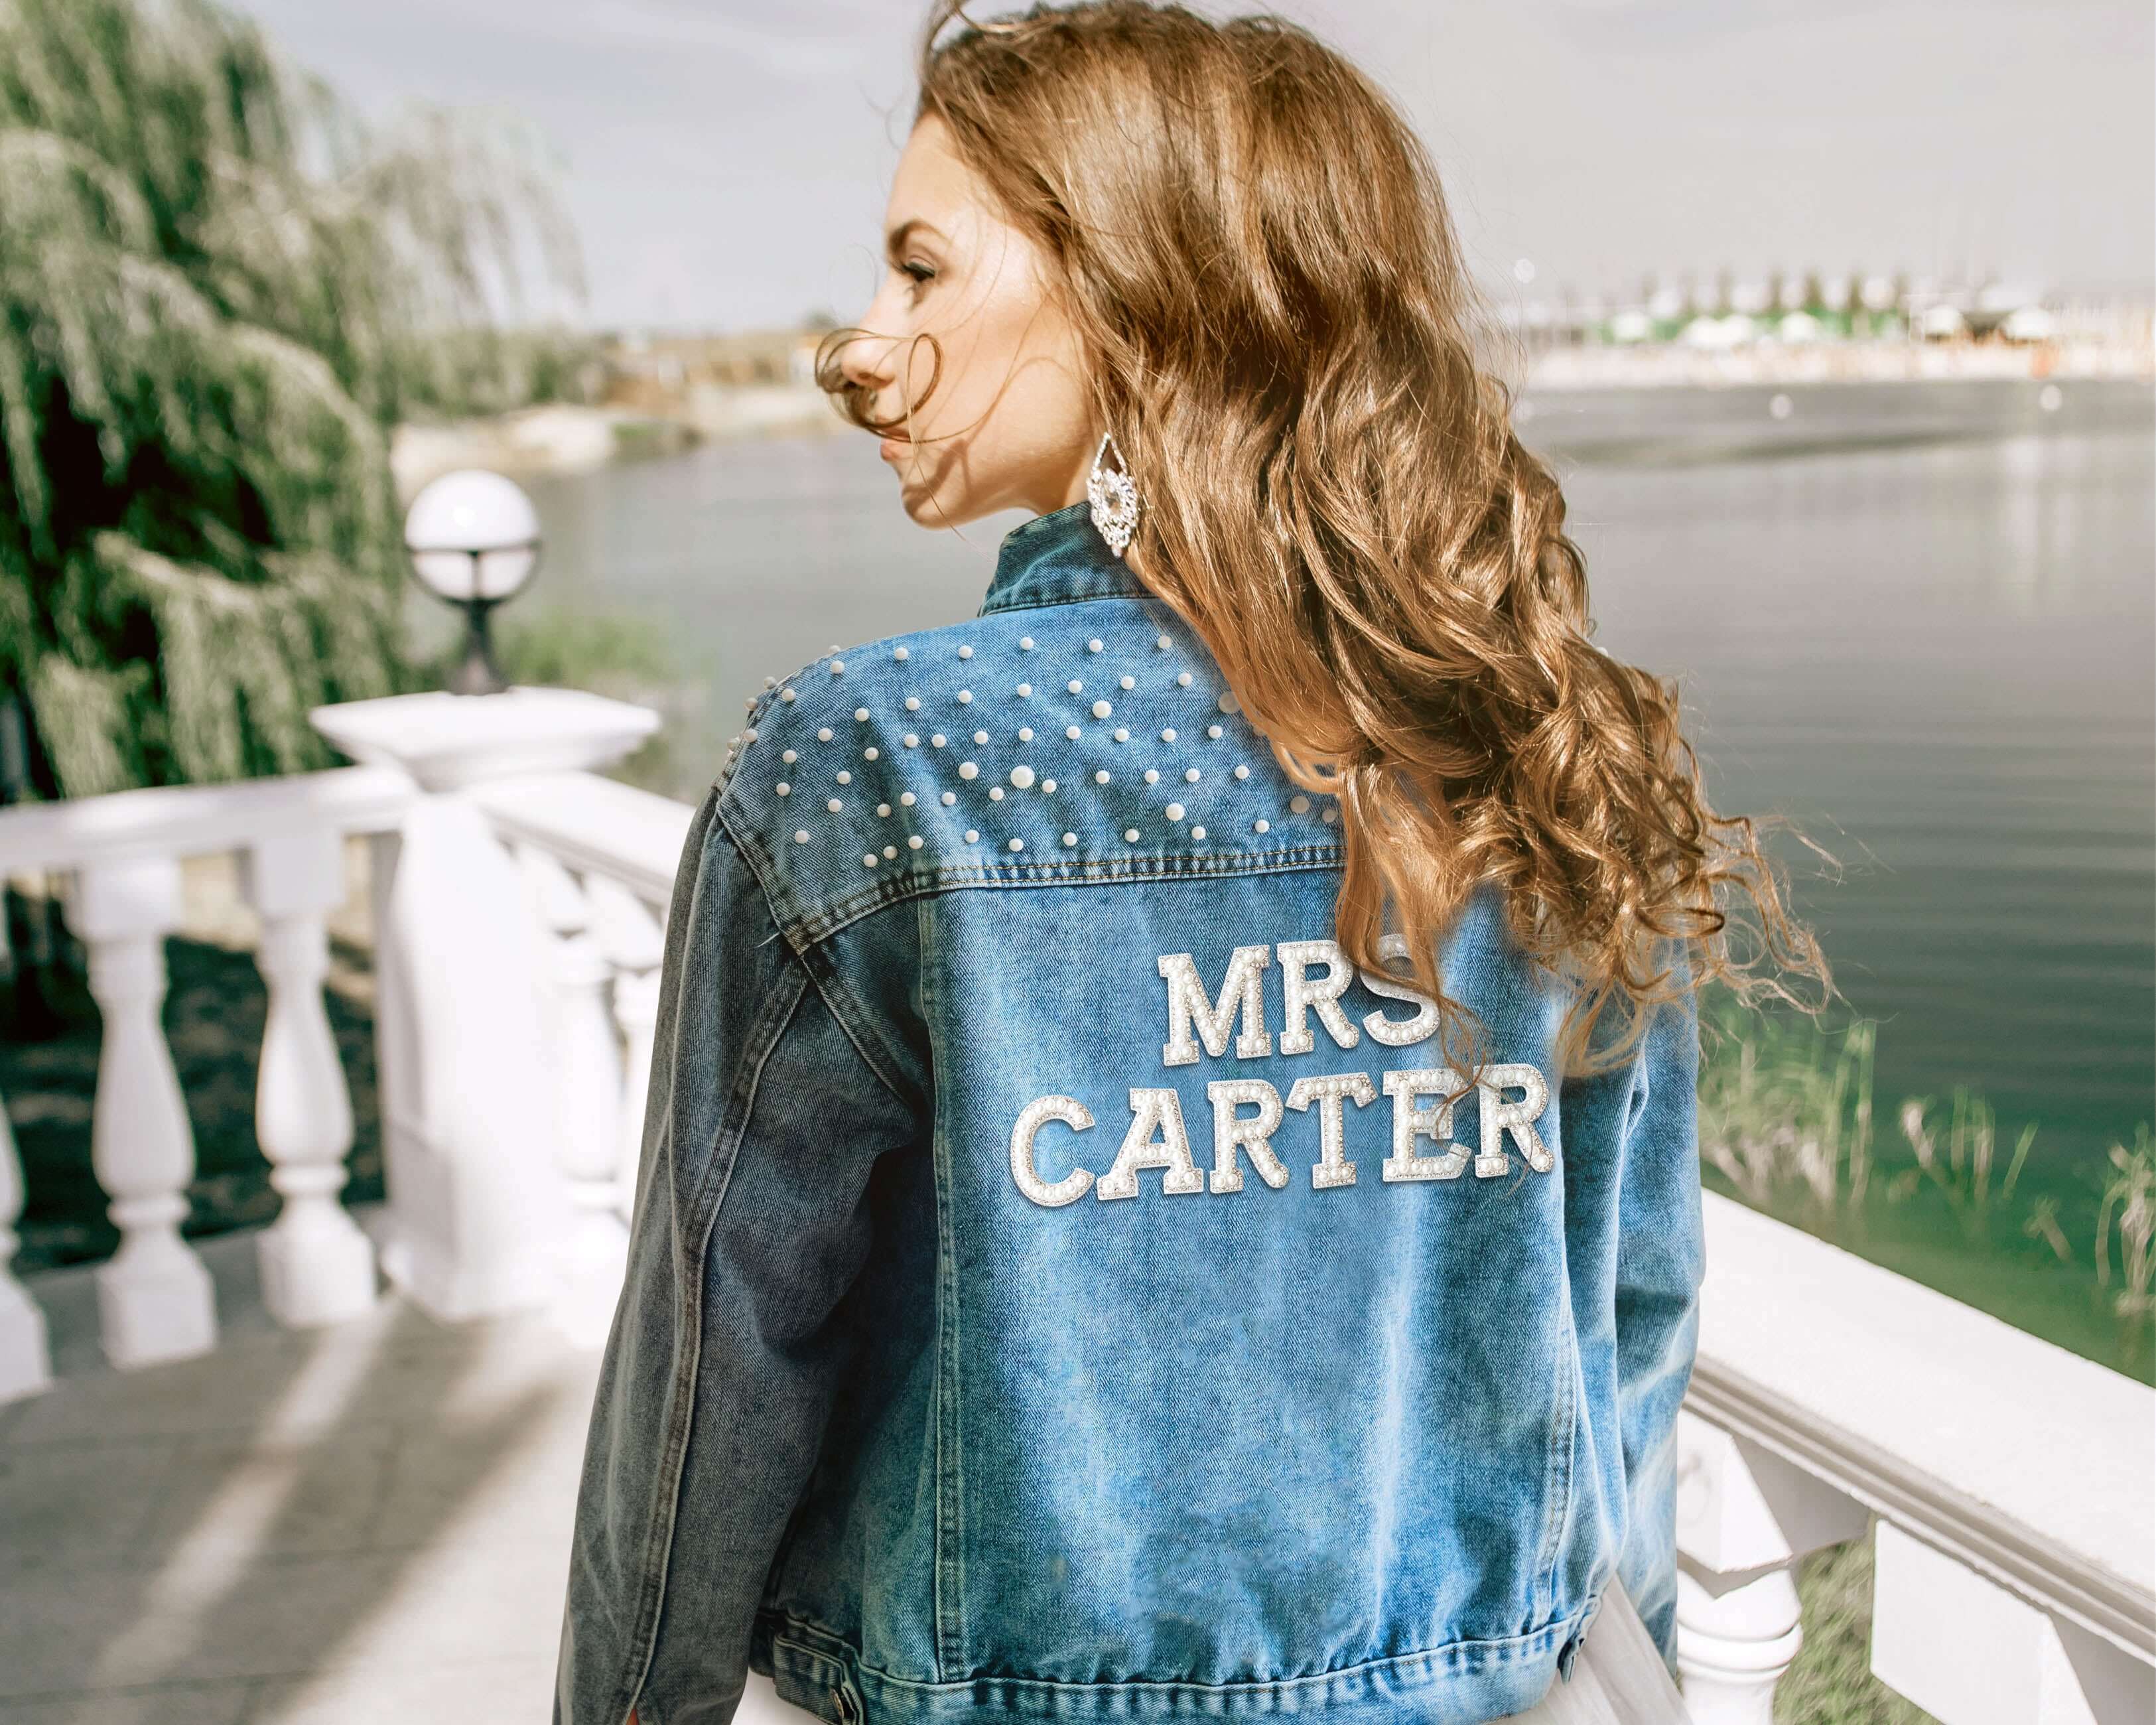 A beautiful bride wore a custom bride jean jacket with pearls on her wedding day.